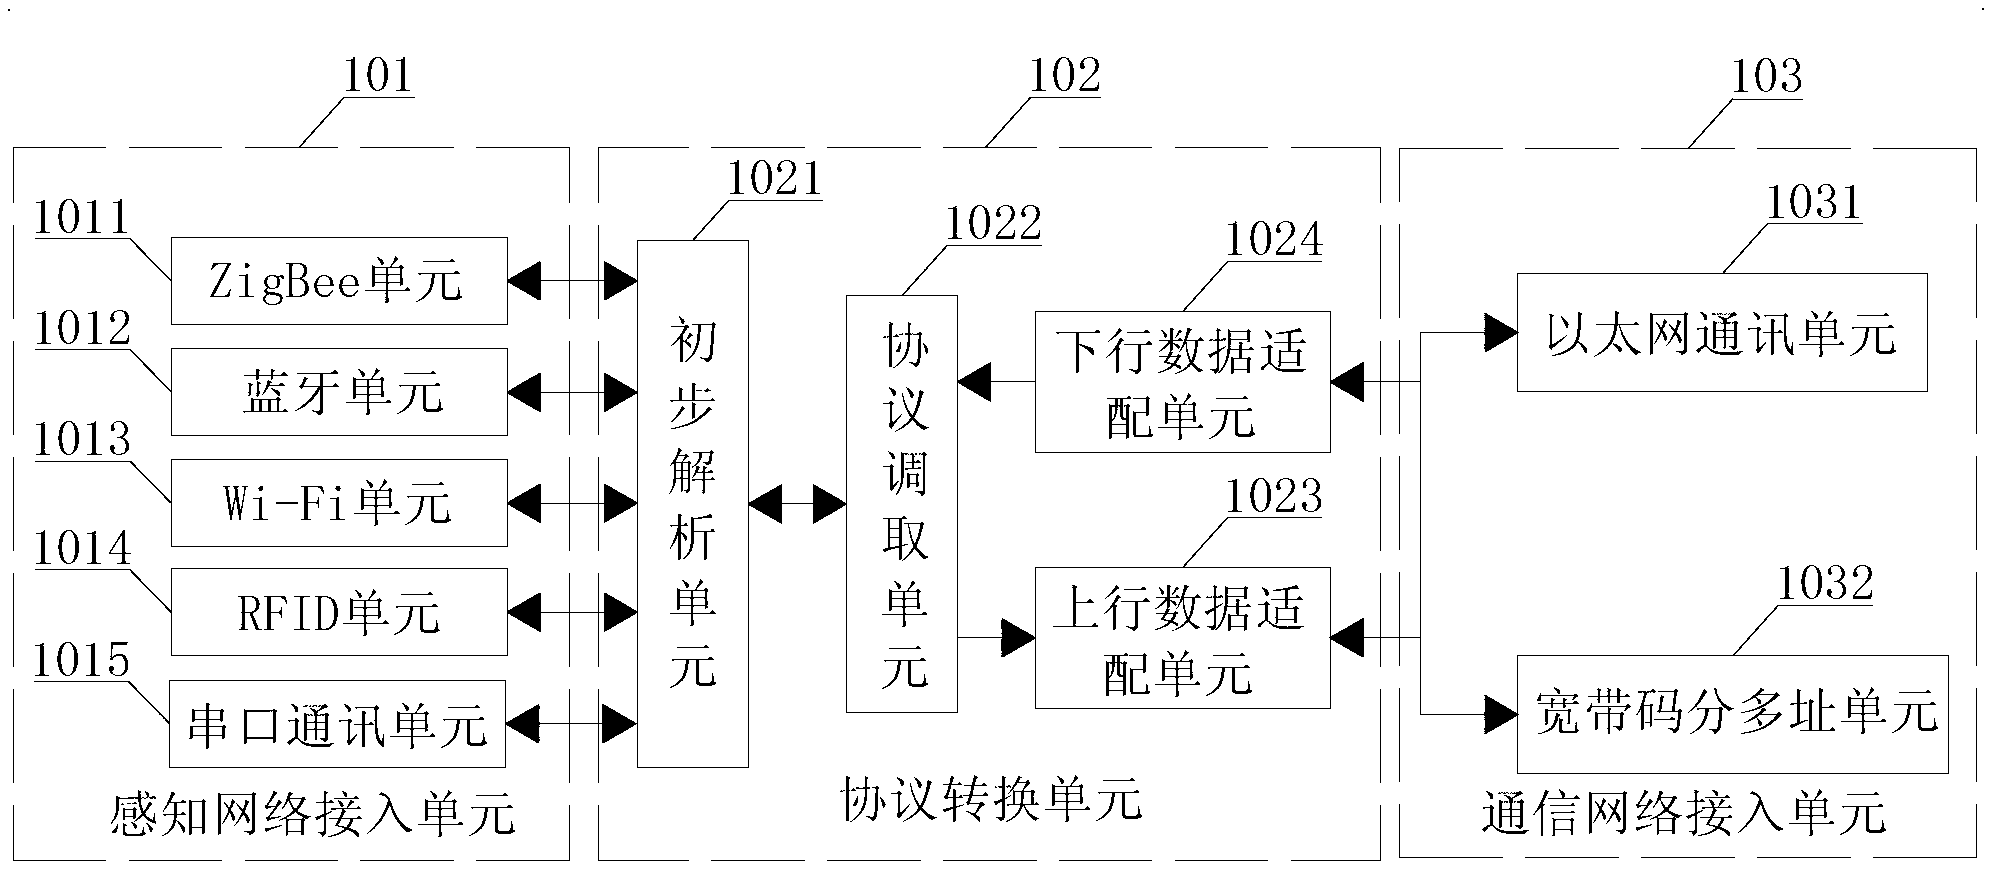 Internet-of-things gateway and medical monitoring system comprising same